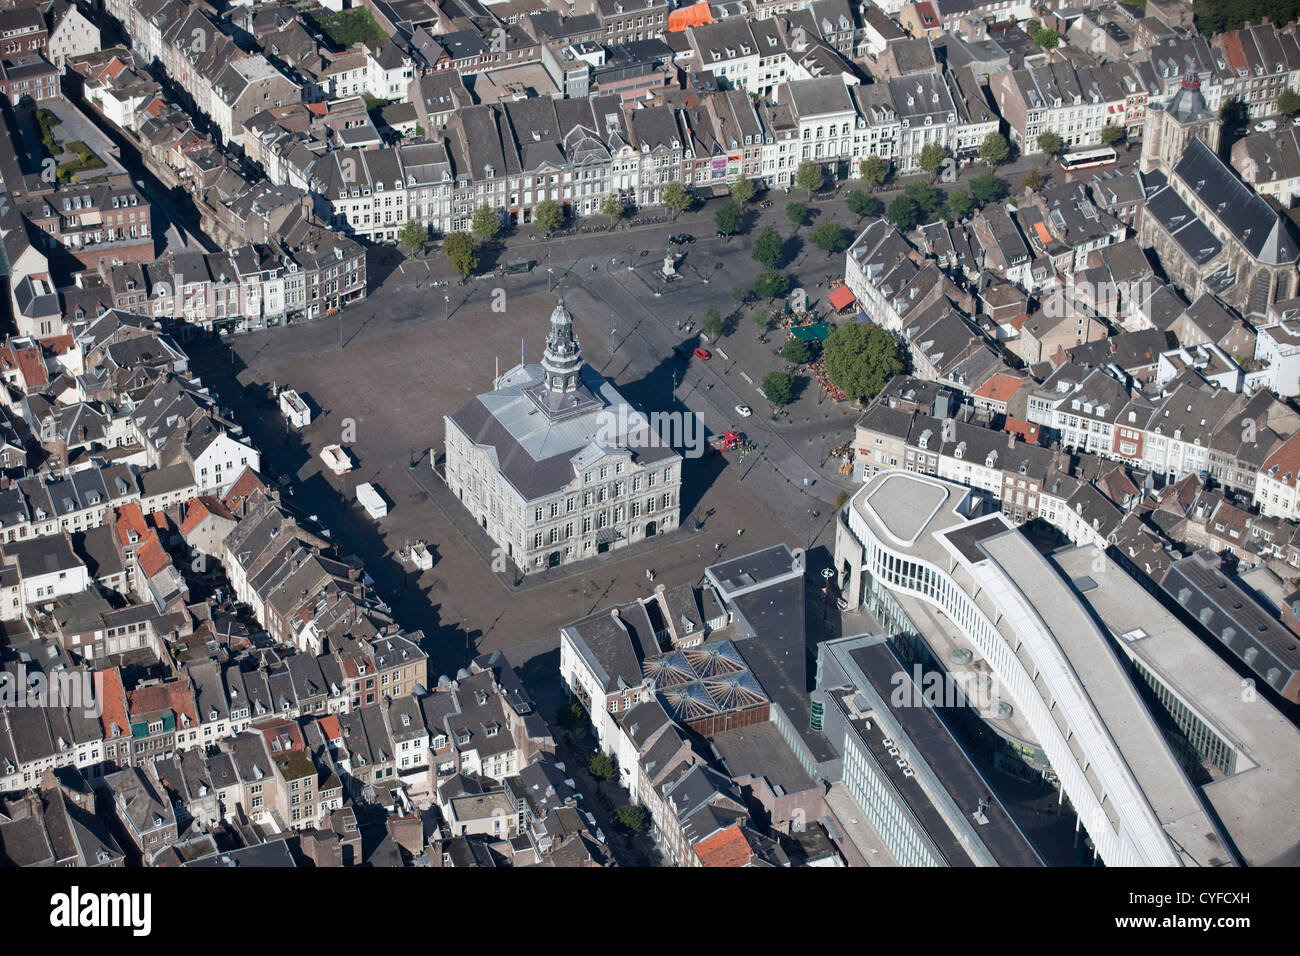 The Netherlands, Maastricht, Townhall. Aerial. Stock Photo